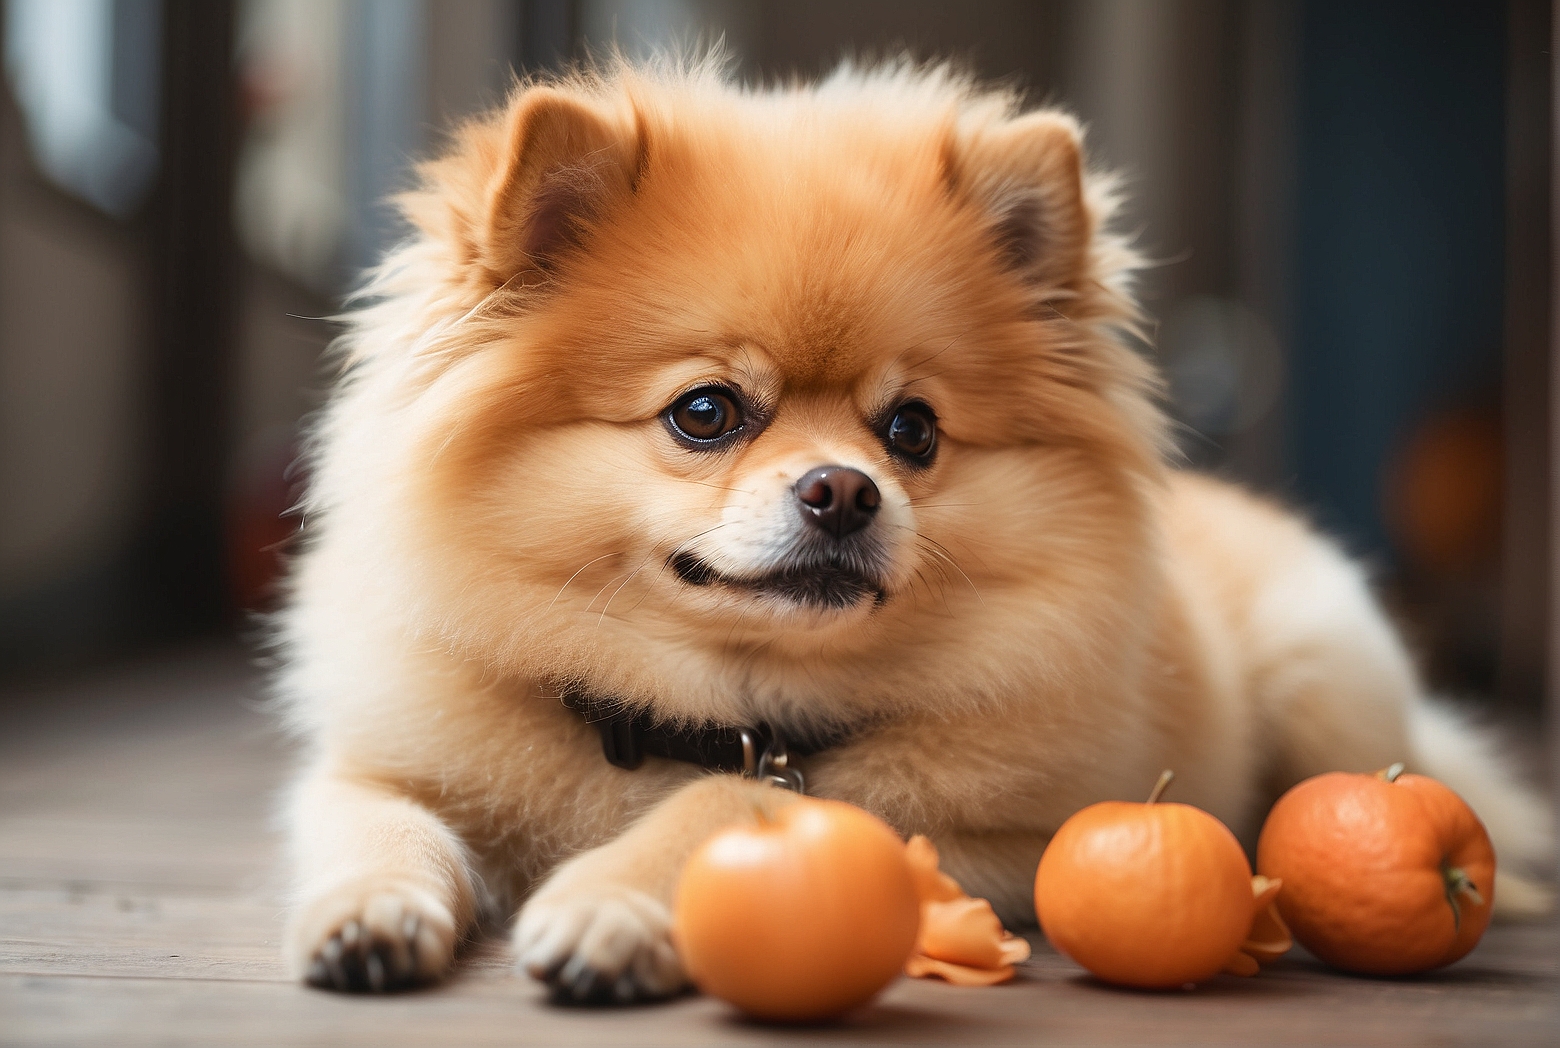 The Possible Reasons For My Pomeranian’s Weight Loss